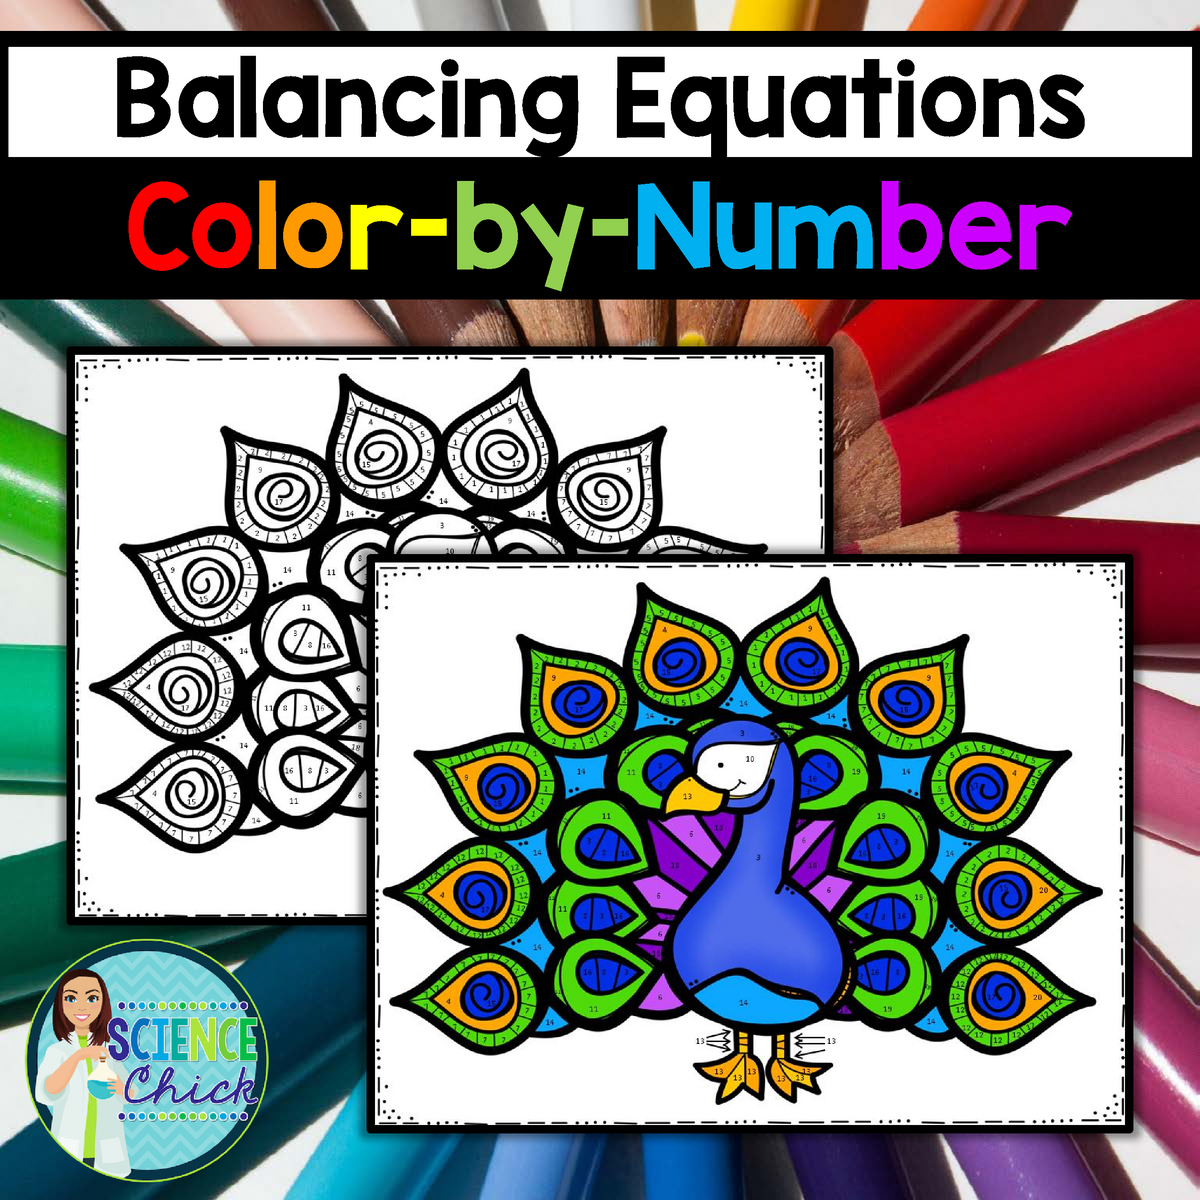 b-e-color-by-number-advanced-balancing-equations-color-by-number-thank-you-thank-you-so-much